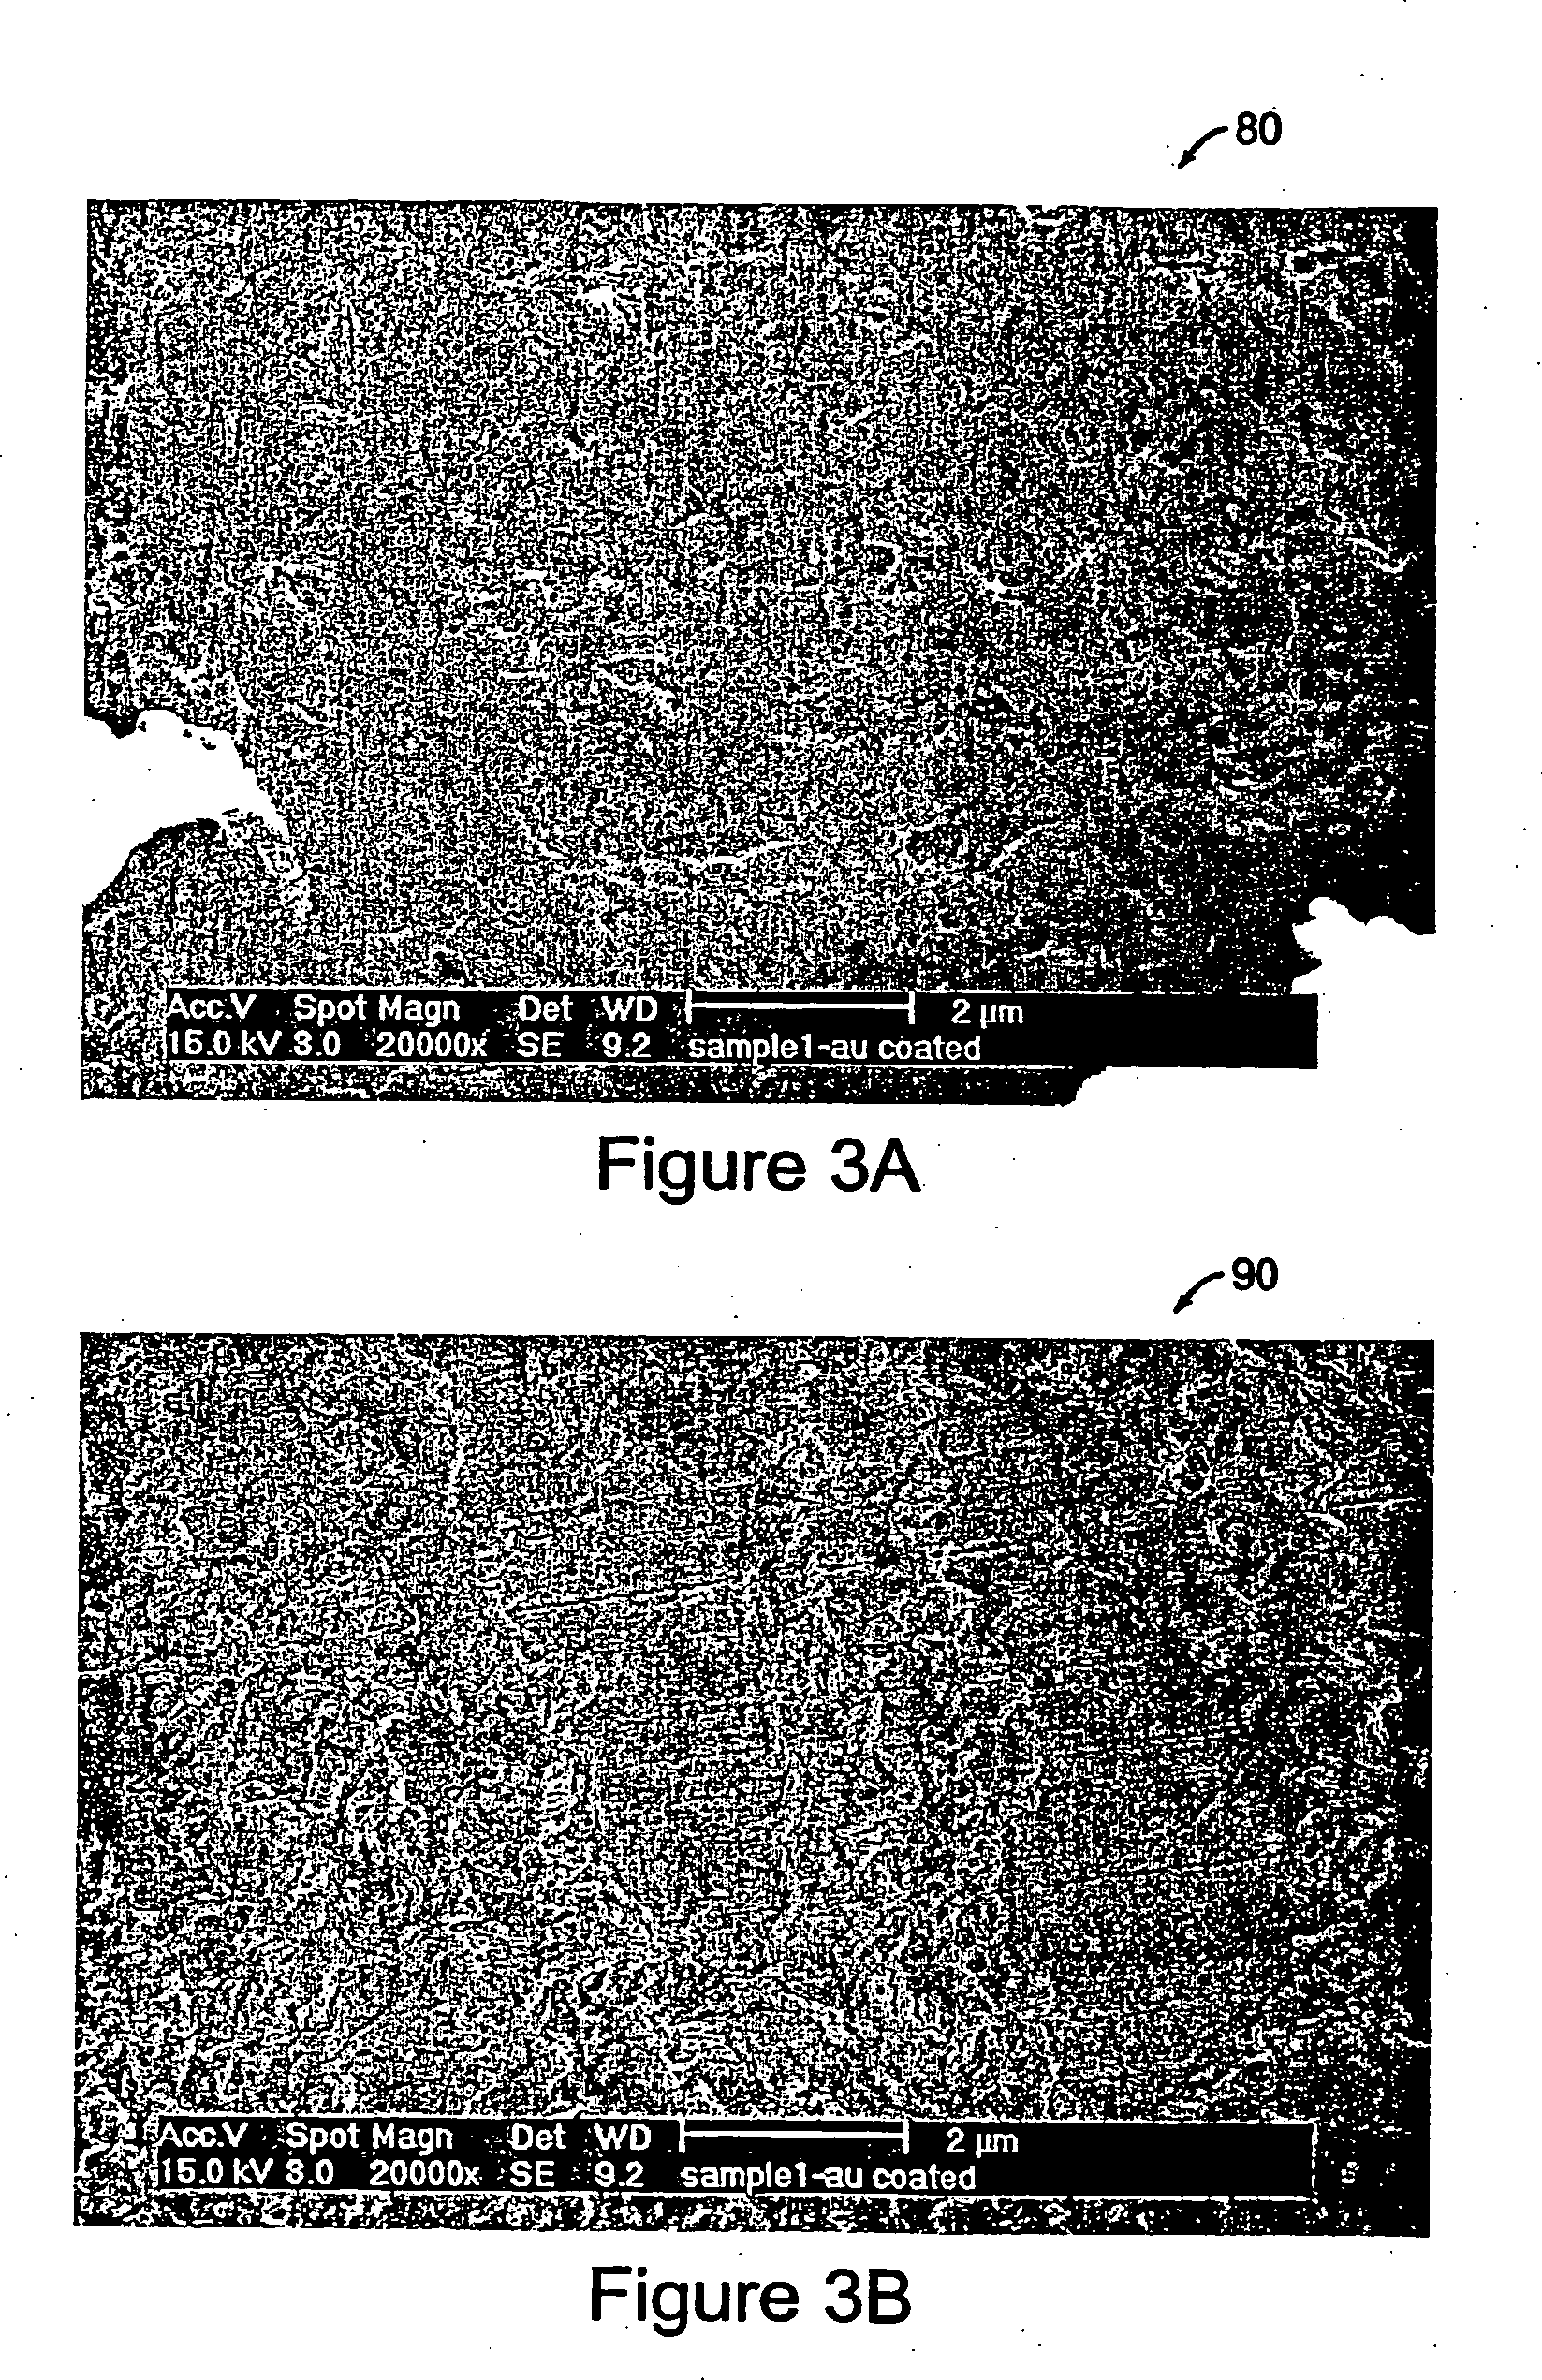 Layered aligned polymer structures and methods of making same